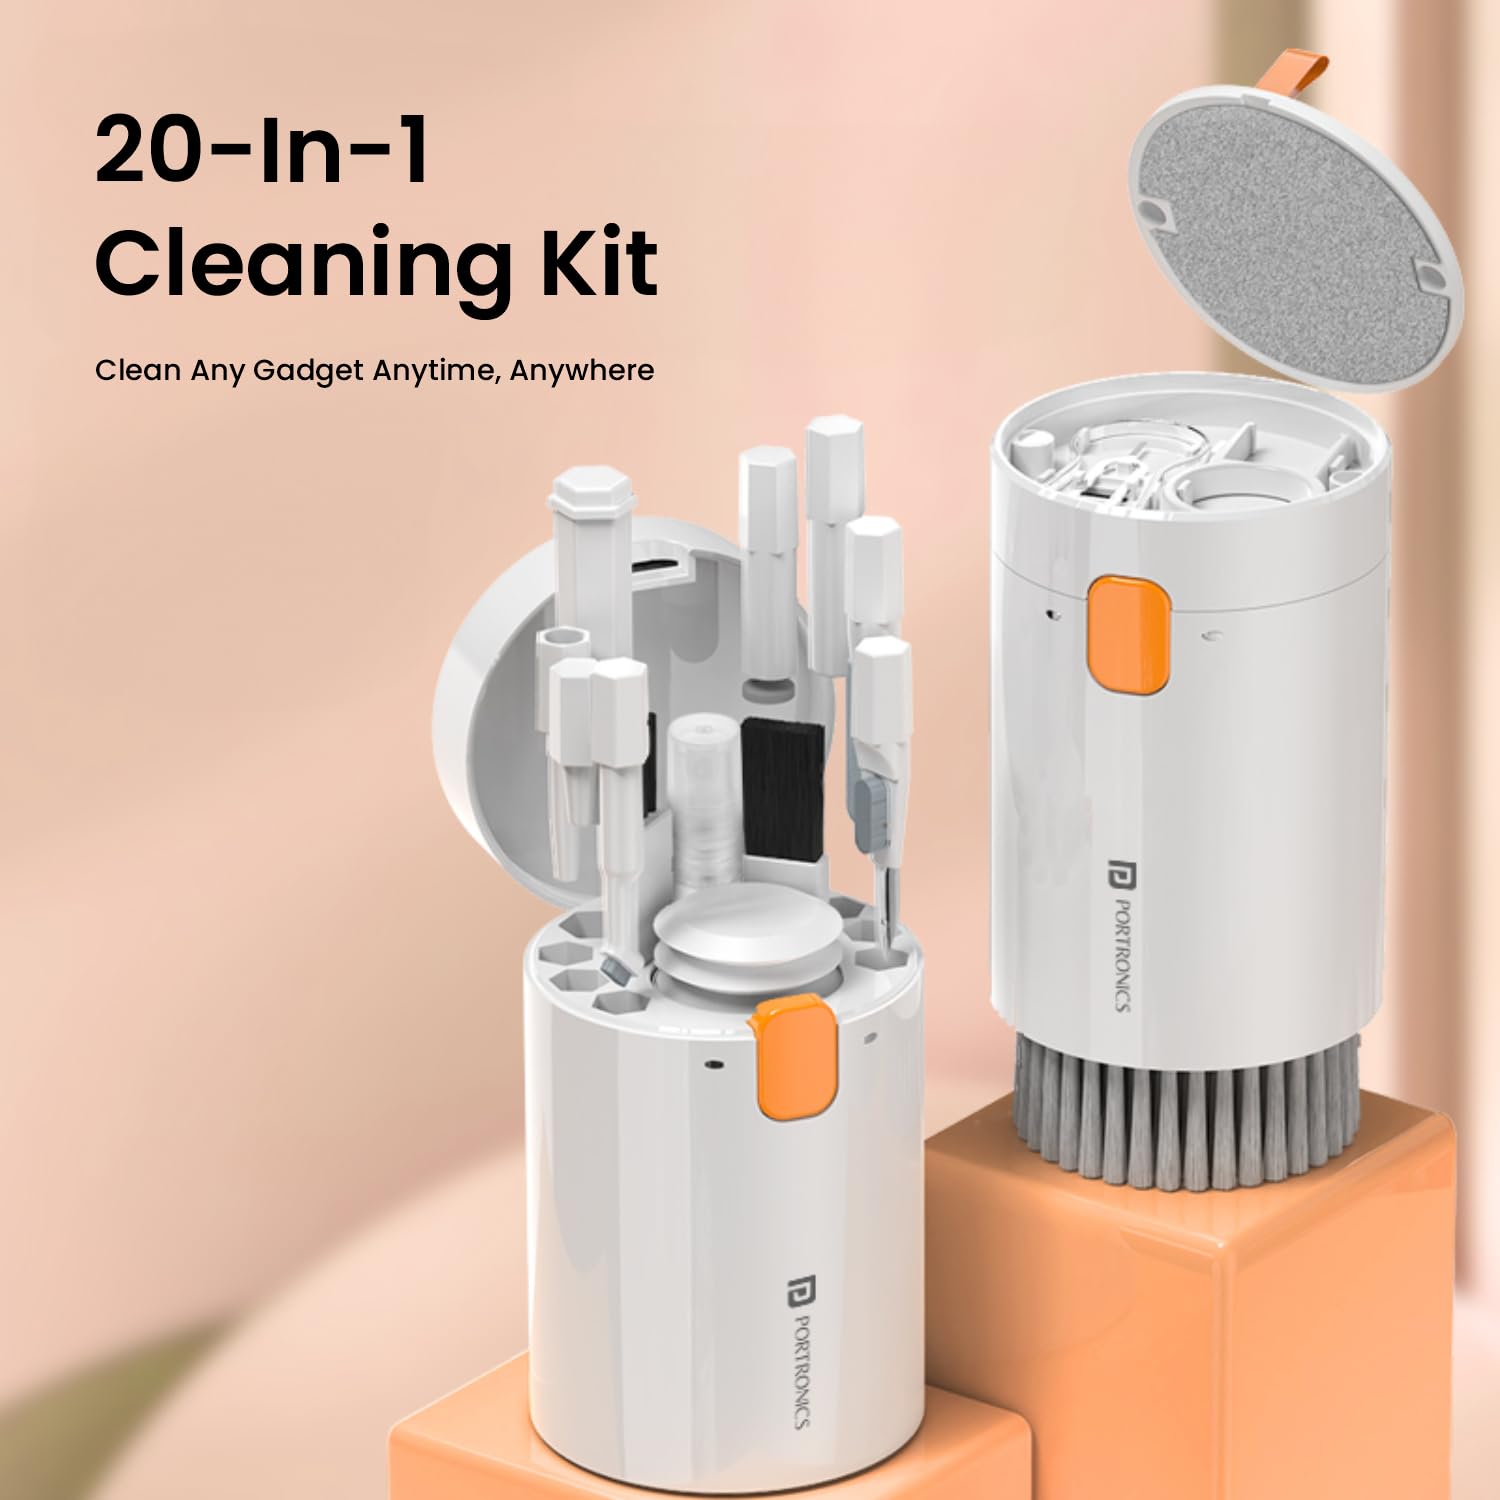 Device Cleaning Kit